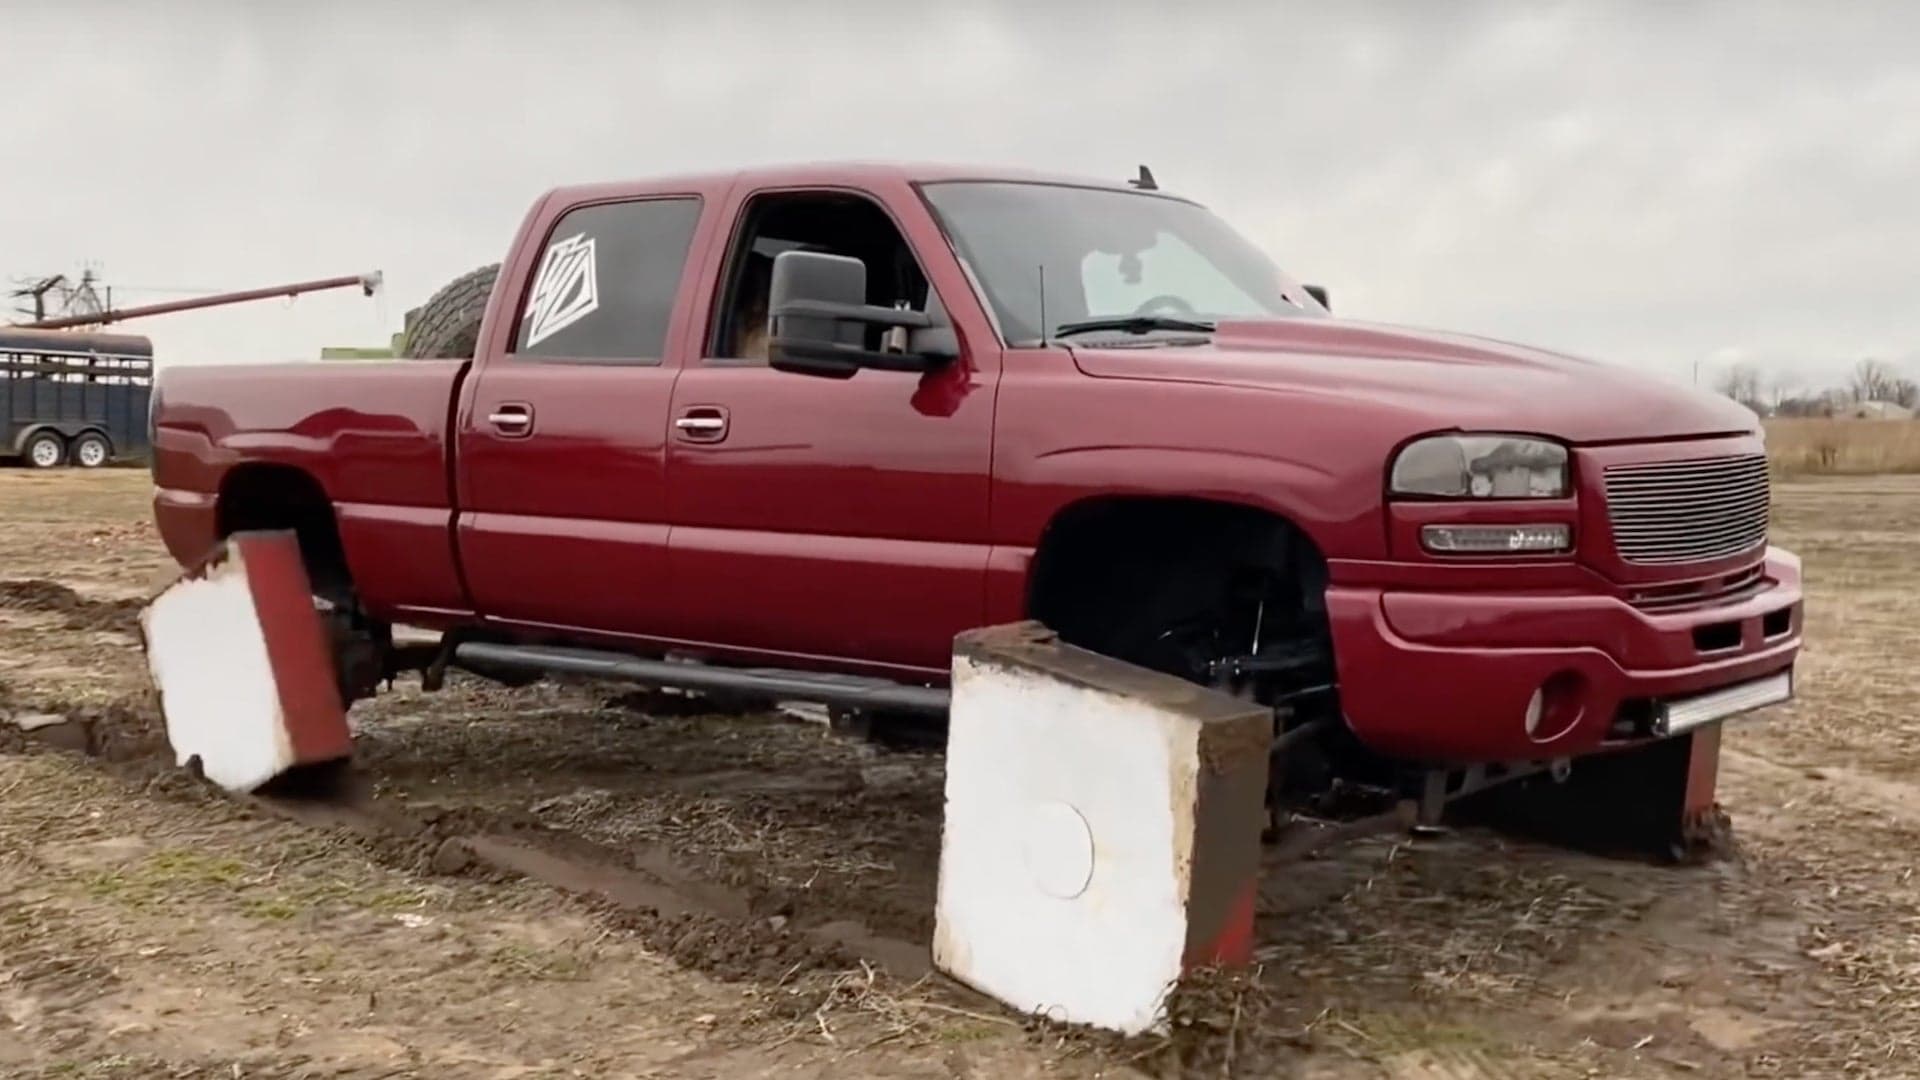 Surprise: This GMC Sierra Pickup With Square Wheels Makes for a Terrible Off-Roader